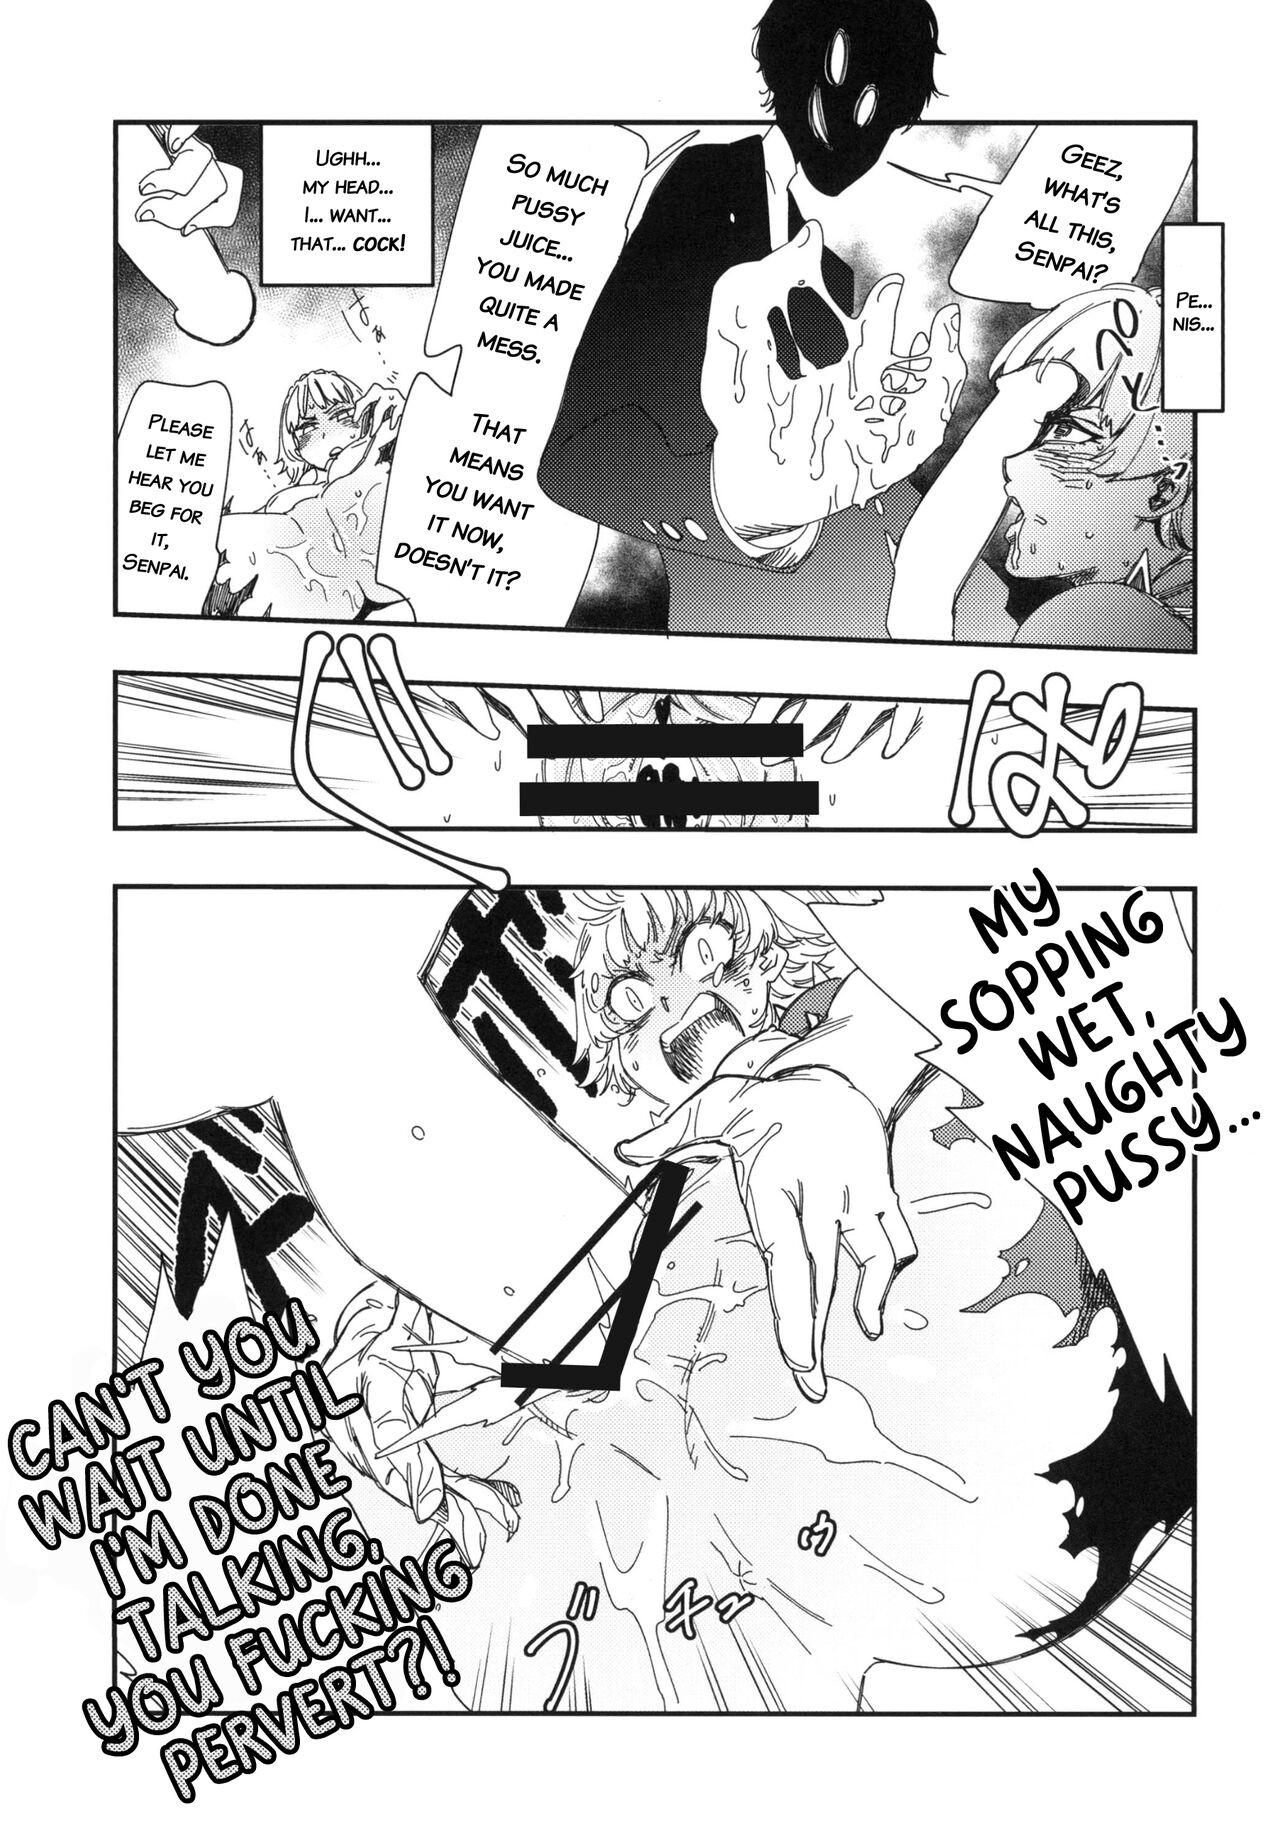 Wet Cunt COFFEE & SPAM - Persona 5 Sixtynine - Page 11